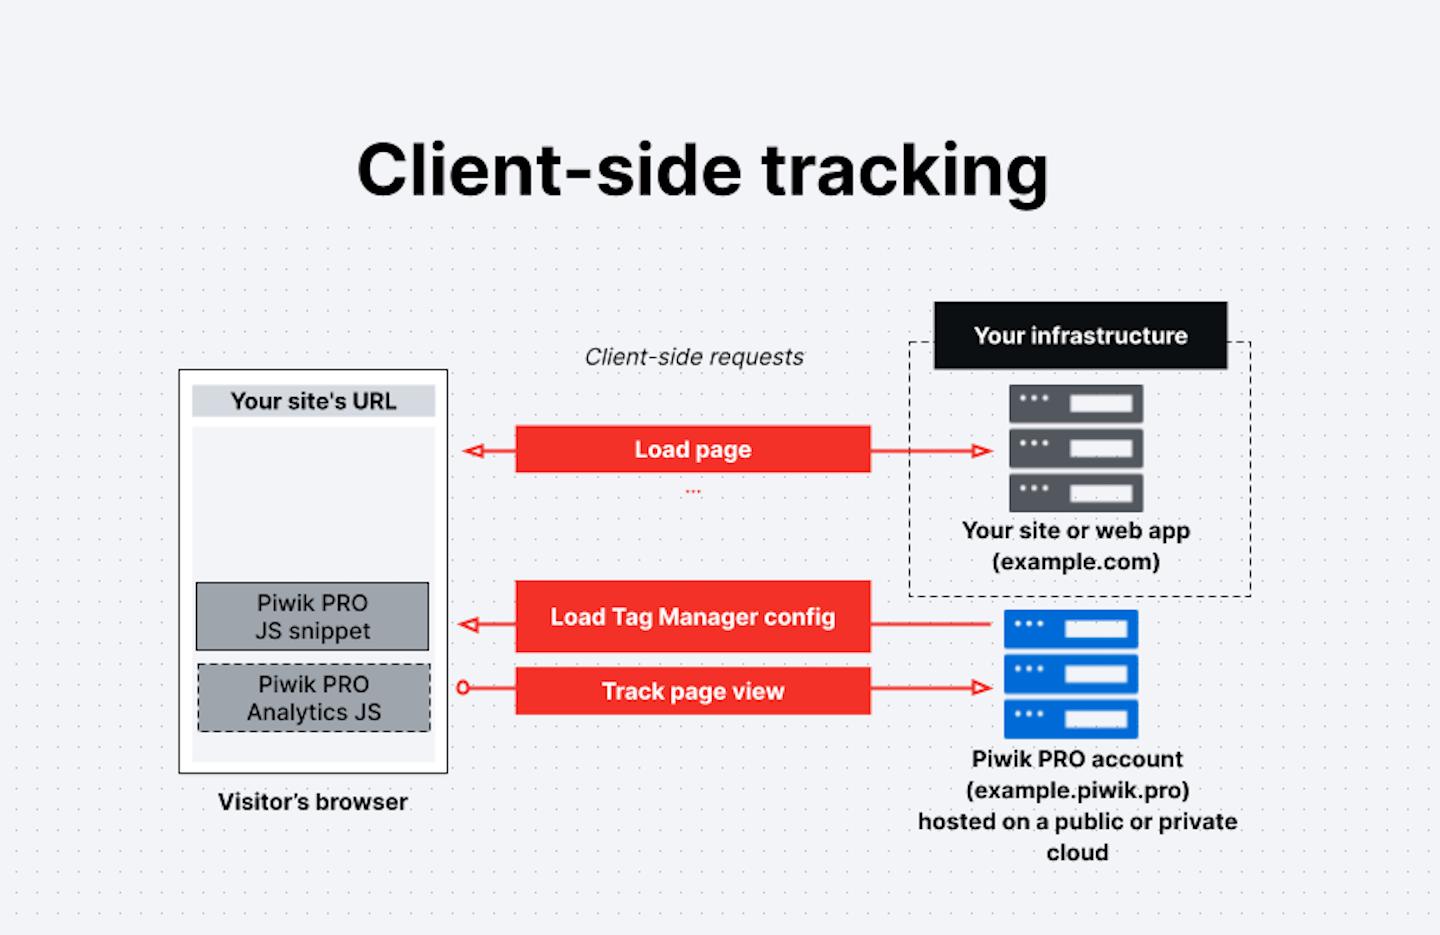 Client-side tracking in Piwik PRO